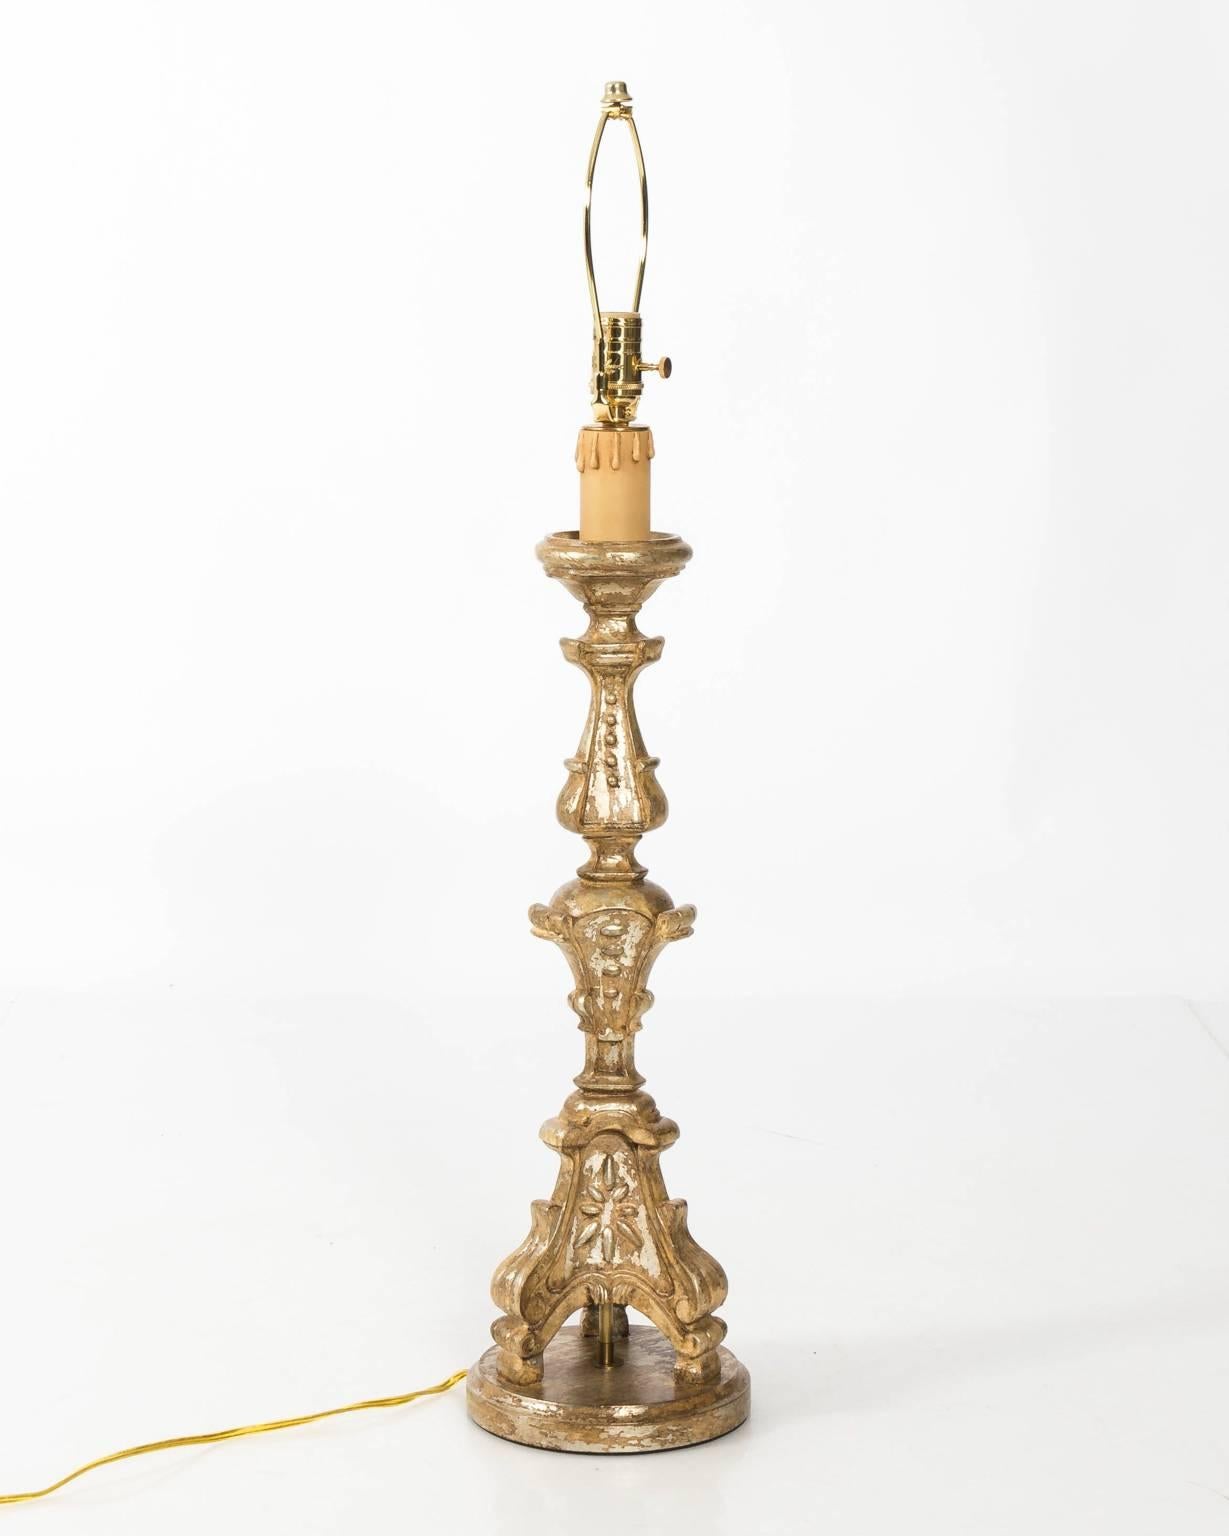 Baroque Pair of Gilded Candlestick Lamps